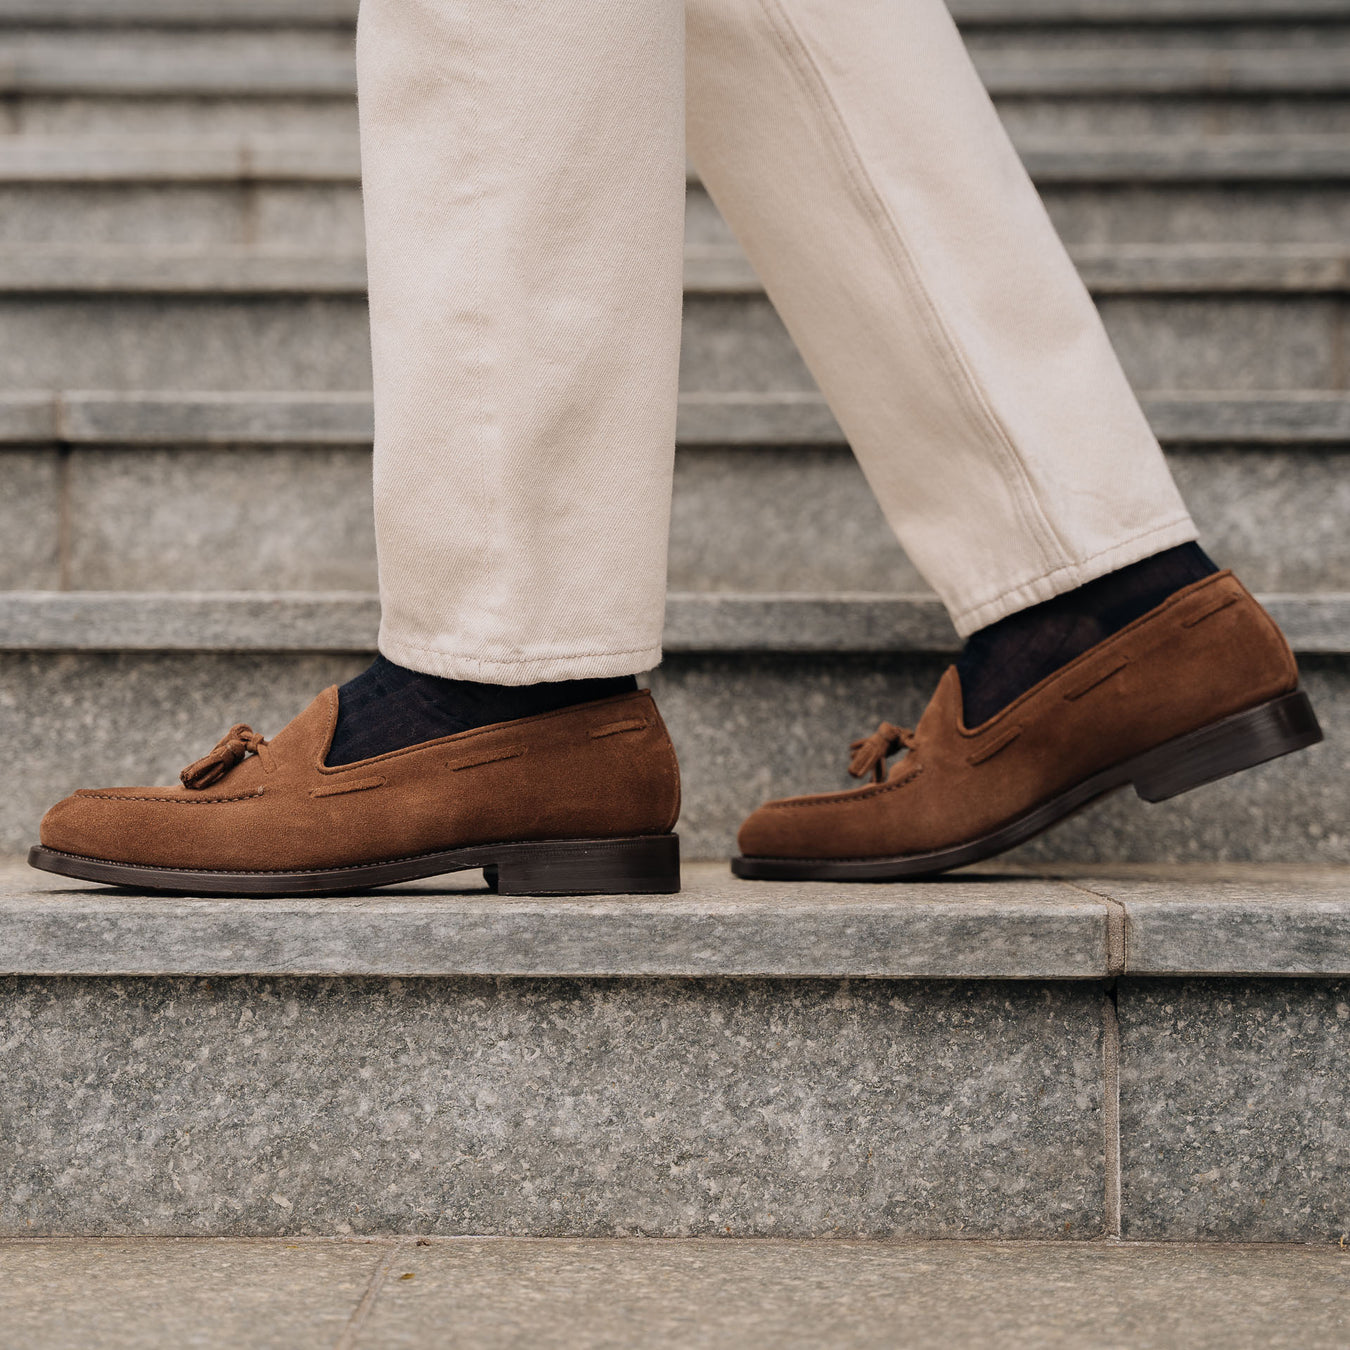 Men’s suede leather Loafers with Tassels | Velasca